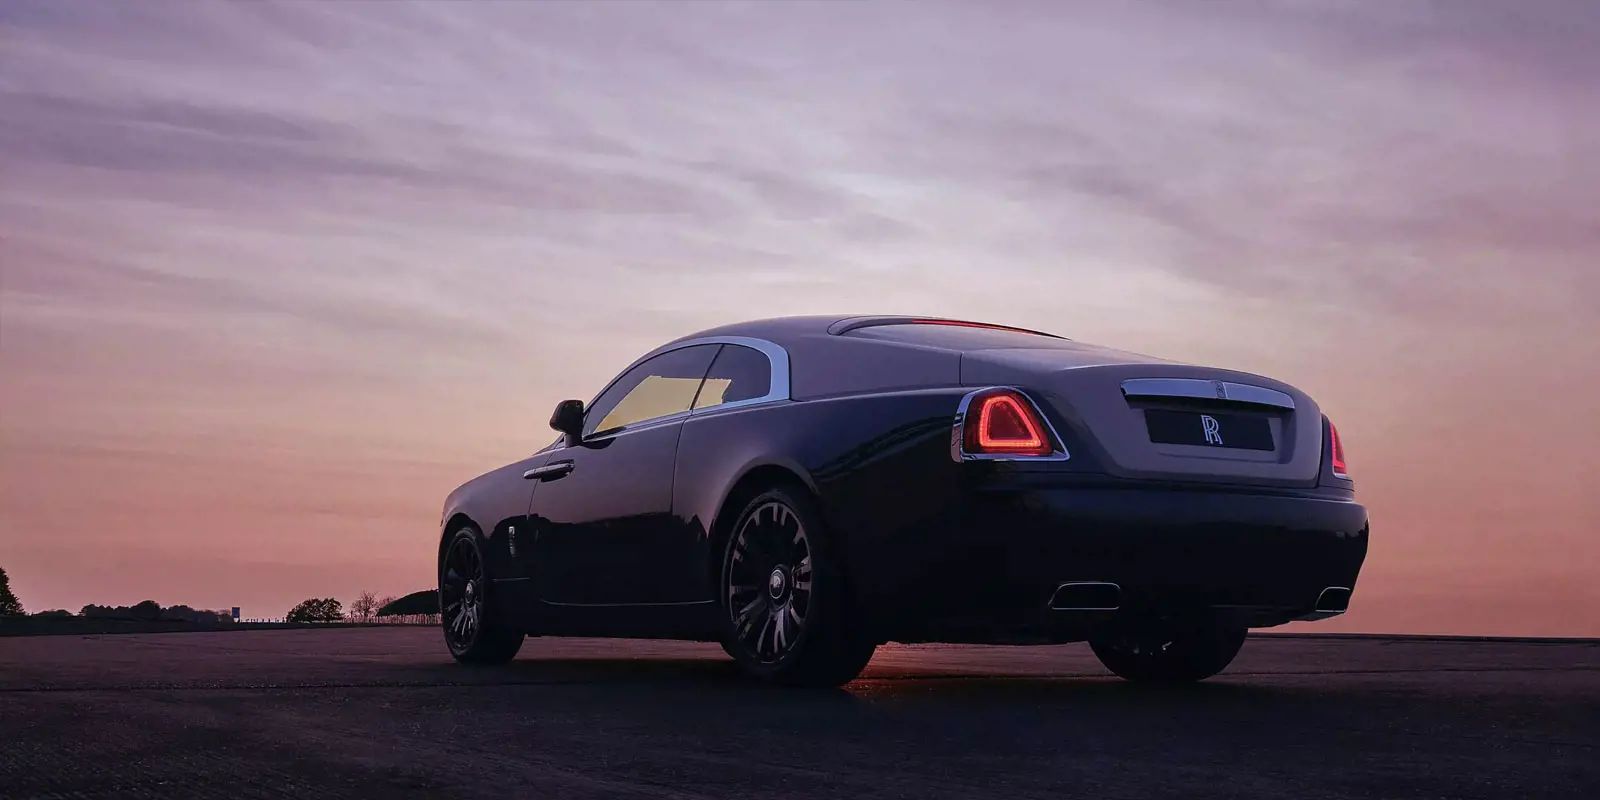 Rolls-Royce Provenance Certified Pre-Owned Cars - Unrivaled Peace Of Mind